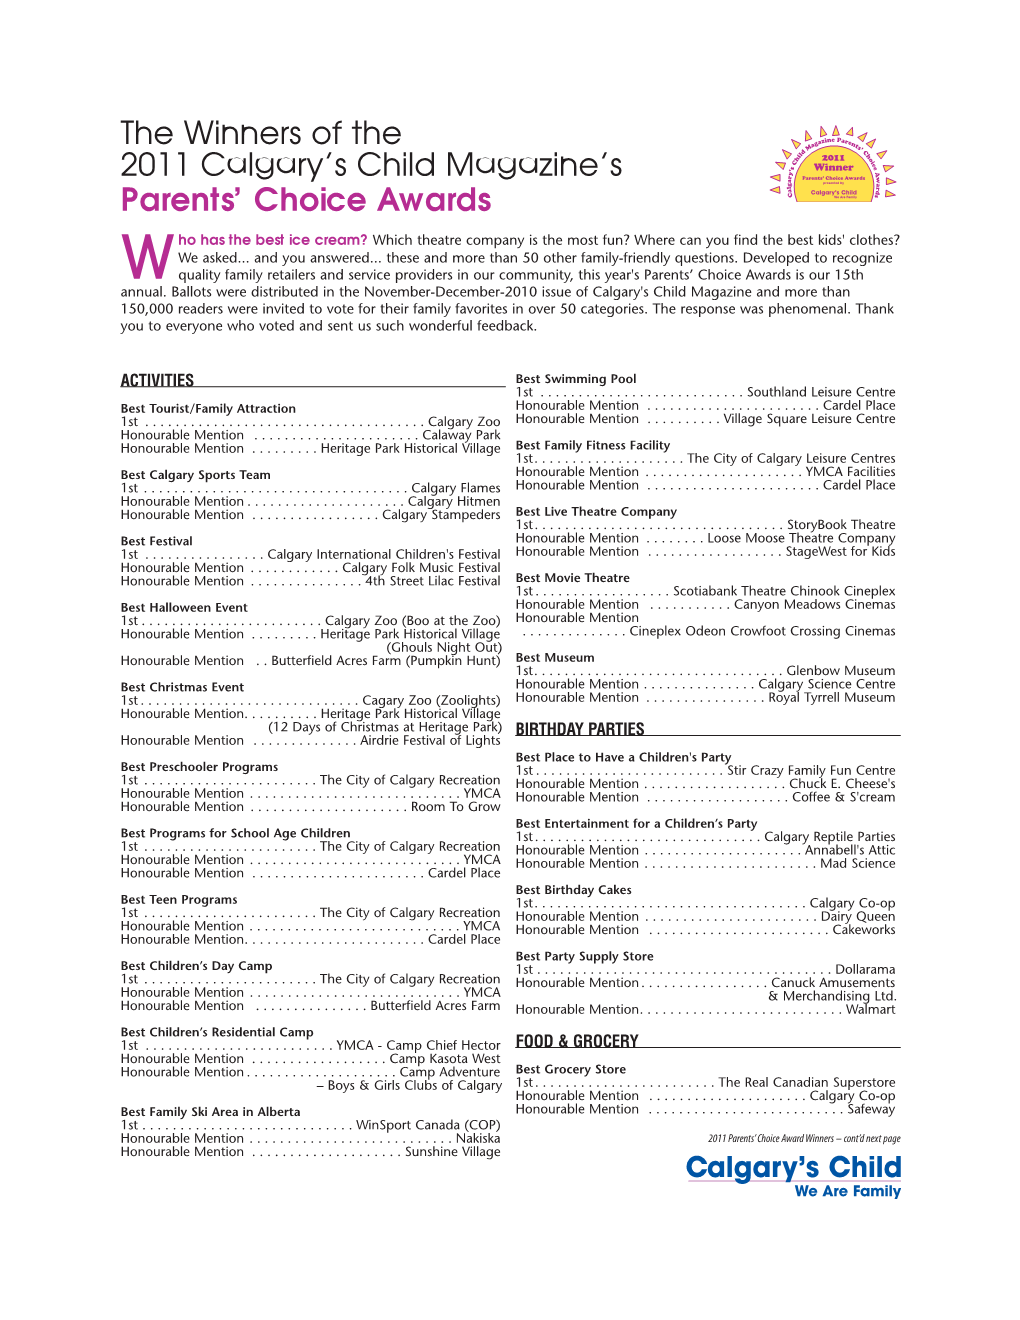 The Winners of the 2011 Calgary's Child Magazine's Parents' Choice